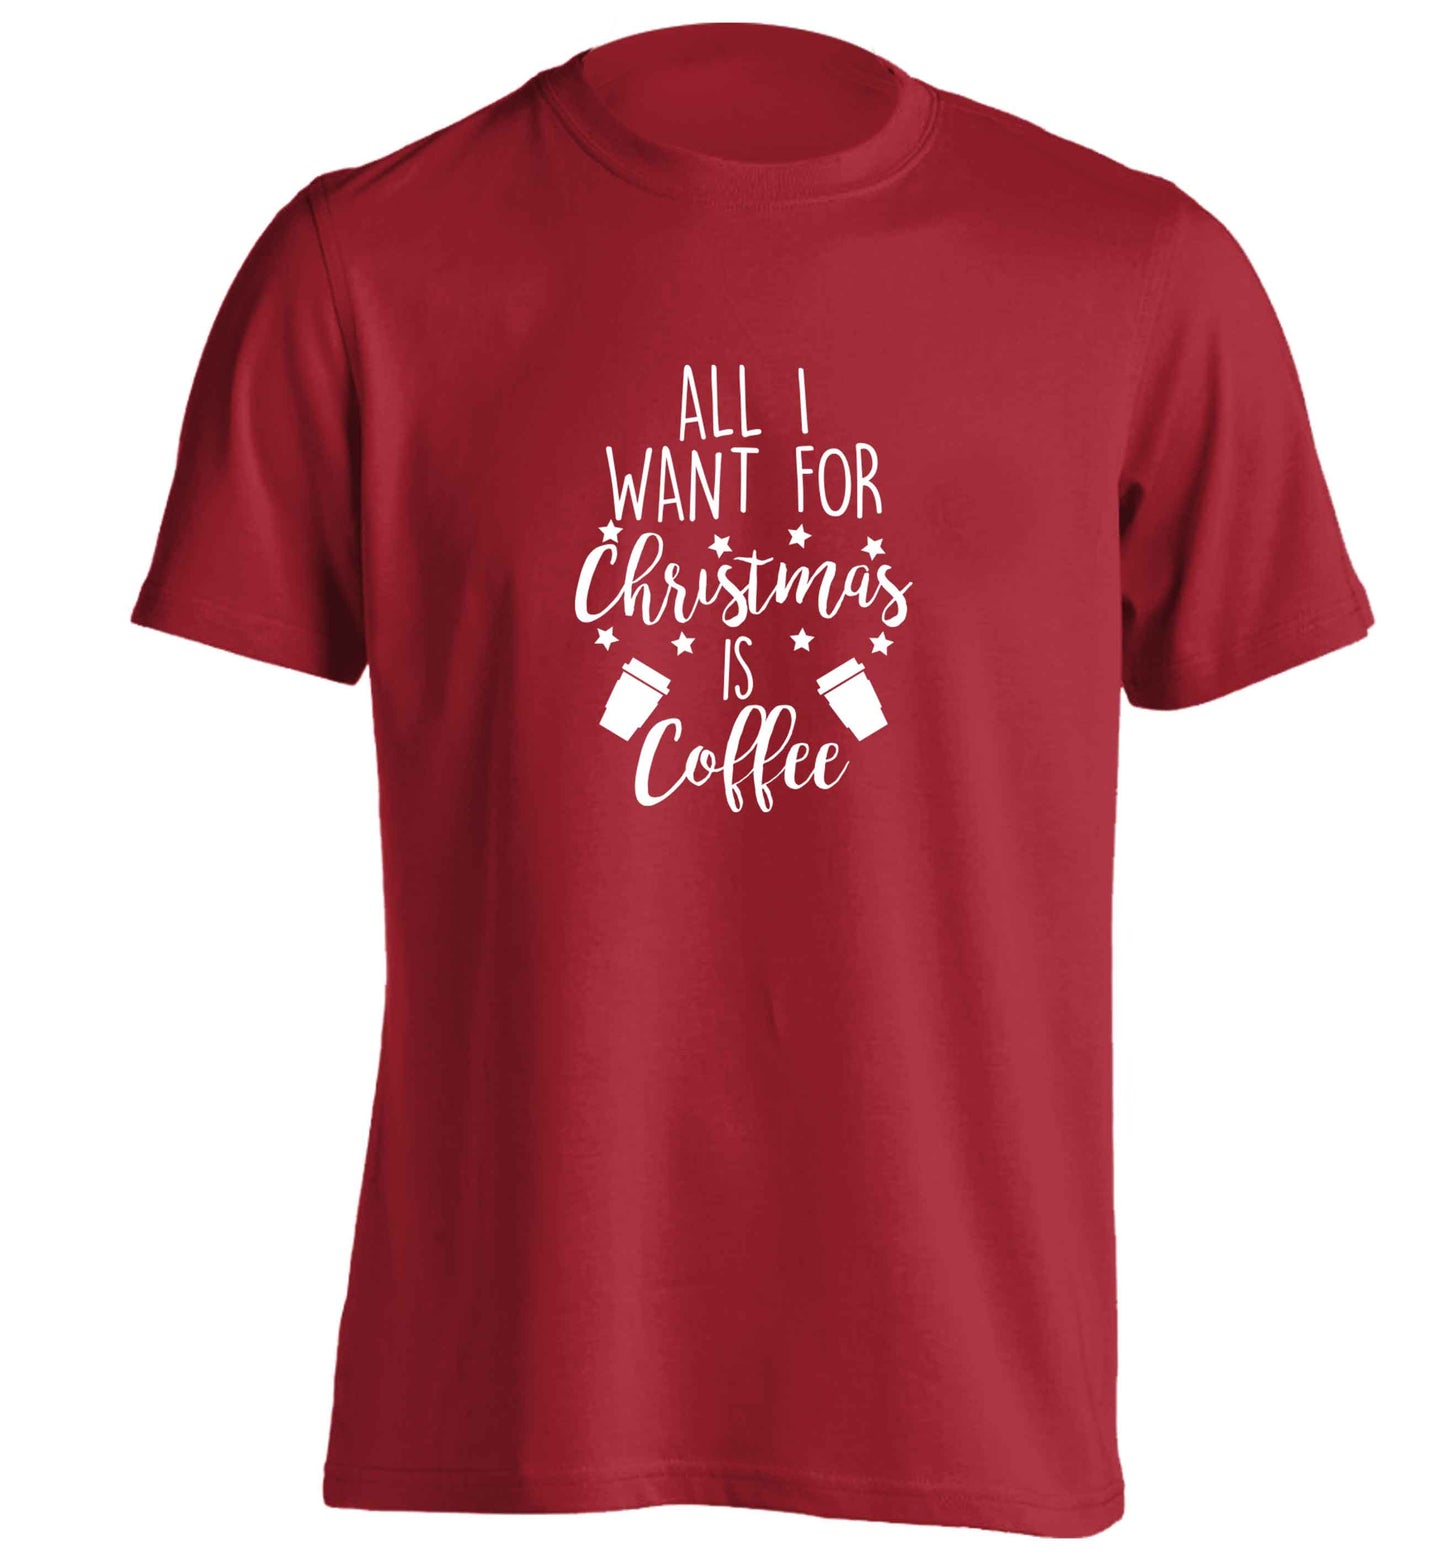 All I want for Christmas is coffee adults unisex red Tshirt 2XL